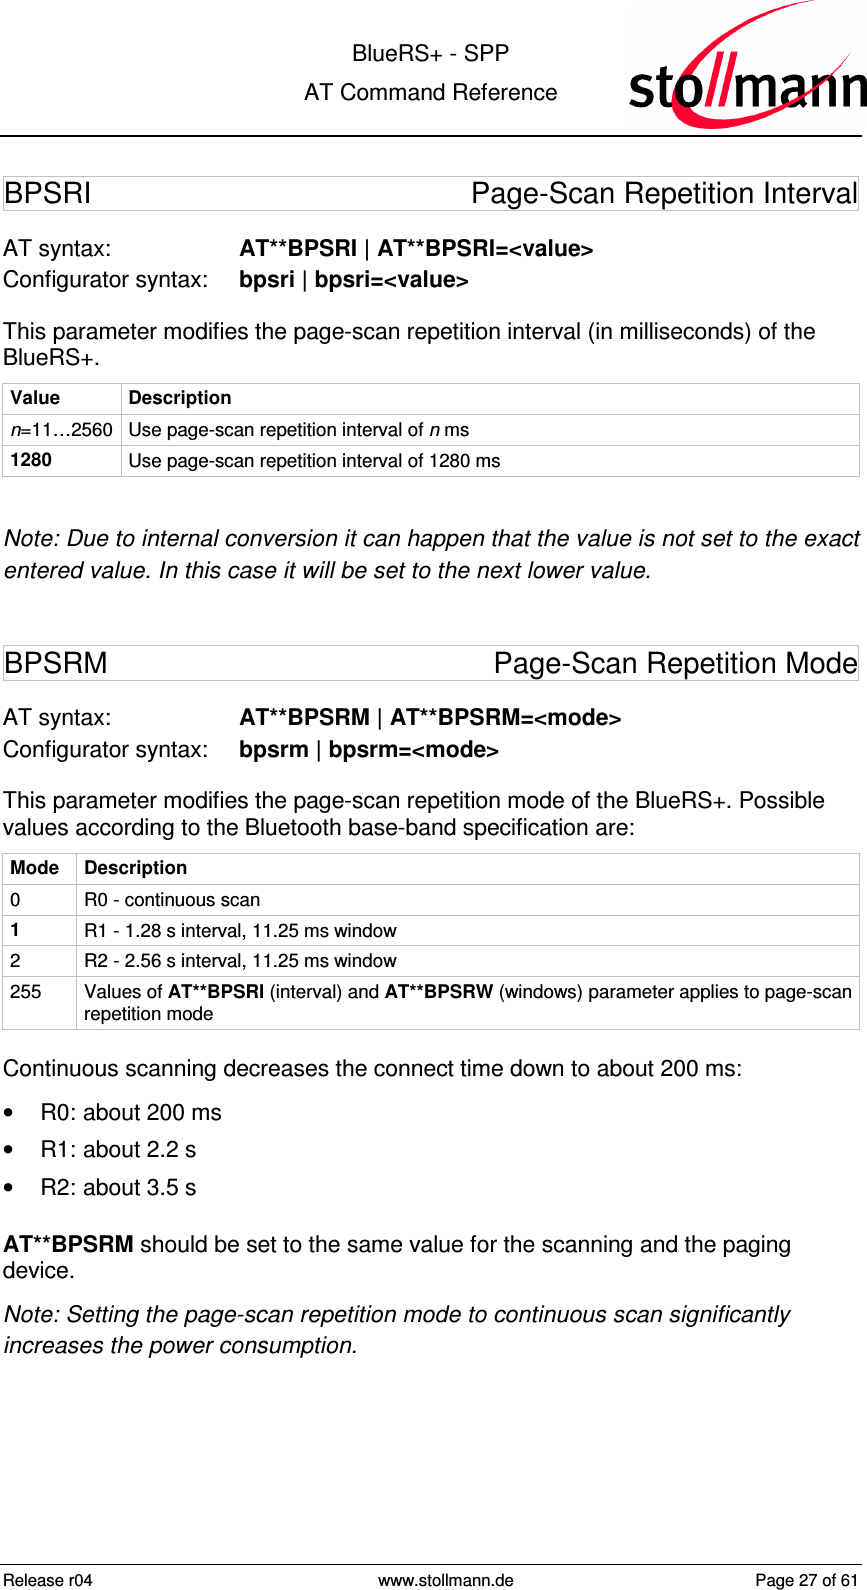  BlueRS+ - SPP AT Command Reference Release r04  www.stollmann.de  Page 27 of 61  BPSRI  Page-Scan Repetition Interval AT syntax:  AT**BPSRI | AT**BPSRI=&lt;value&gt; Configurator syntax:  bpsri | bpsri=&lt;value&gt; This parameter modifies the page-scan repetition interval (in milliseconds) of the BlueRS+.  Value  Description n=11…2560 Use page-scan repetition interval of n ms 1280  Use page-scan repetition interval of 1280 ms  Note: Due to internal conversion it can happen that the value is not set to the exact entered value. In this case it will be set to the next lower value. BPSRM  Page-Scan Repetition Mode AT syntax:  AT**BPSRM | AT**BPSRM=&lt;mode&gt; Configurator syntax:  bpsrm | bpsrm=&lt;mode&gt; This parameter modifies the page-scan repetition mode of the BlueRS+. Possible values according to the Bluetooth base-band specification are: Mode  Description 0  R0 - continuous scan 1  R1 - 1.28 s interval, 11.25 ms window 2  R2 - 2.56 s interval, 11.25 ms window 255  Values of AT**BPSRI (interval) and AT**BPSRW (windows) parameter applies to page-scan repetition mode Continuous scanning decreases the connect time down to about 200 ms: •  R0:  about 200 ms •  R1:  about 2.2 s •  R2:  about 3.5 s AT**BPSRM should be set to the same value for the scanning and the paging device. Note: Setting the page-scan repetition mode to continuous scan significantly increases the power consumption. 